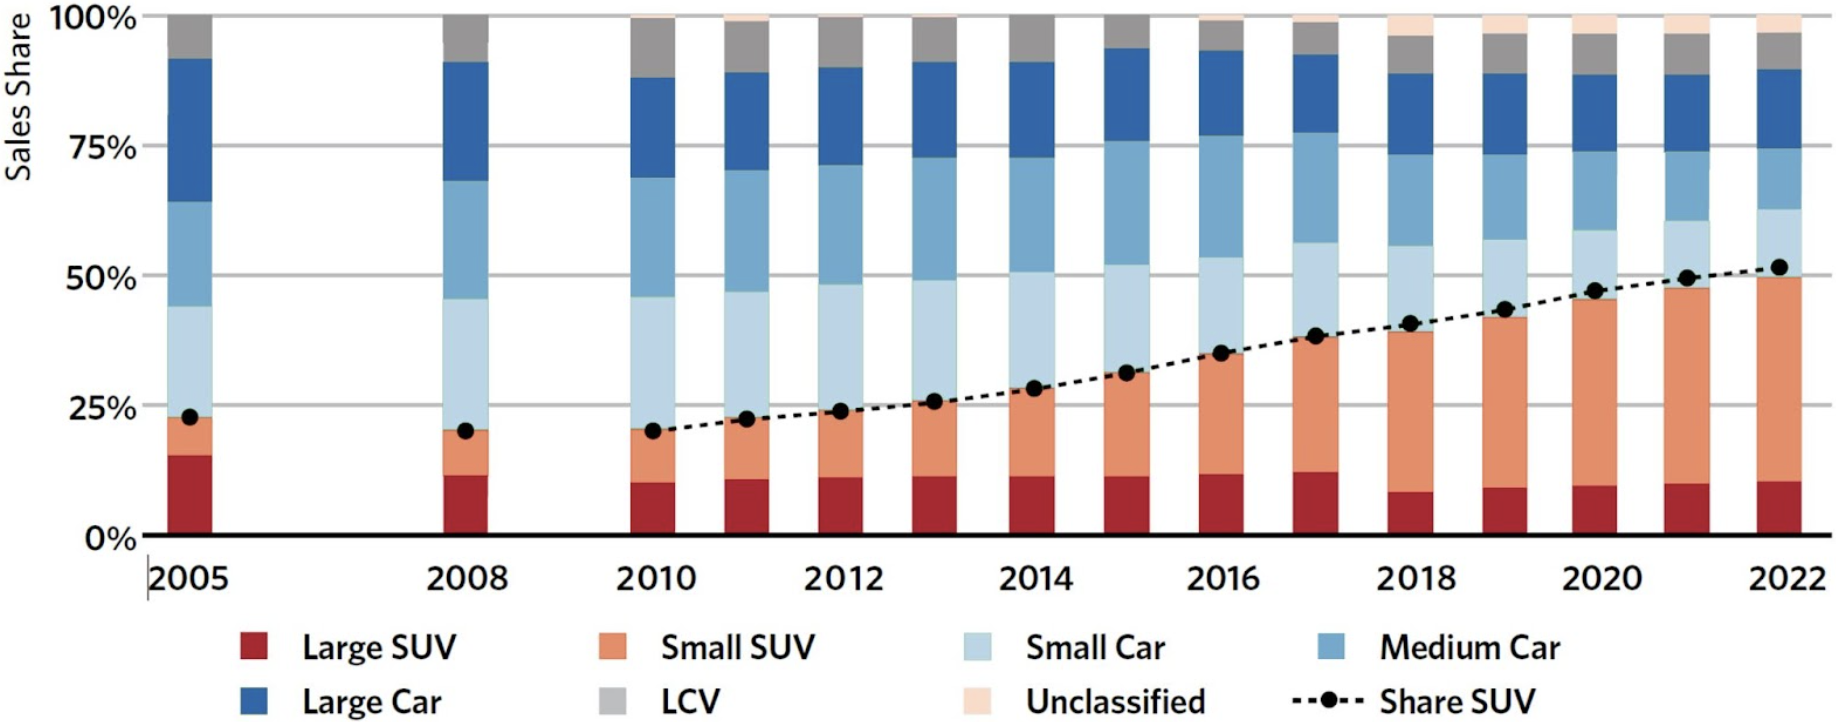 Global light-duty vehicle sales by segment (LCV = light commercial vehicle)